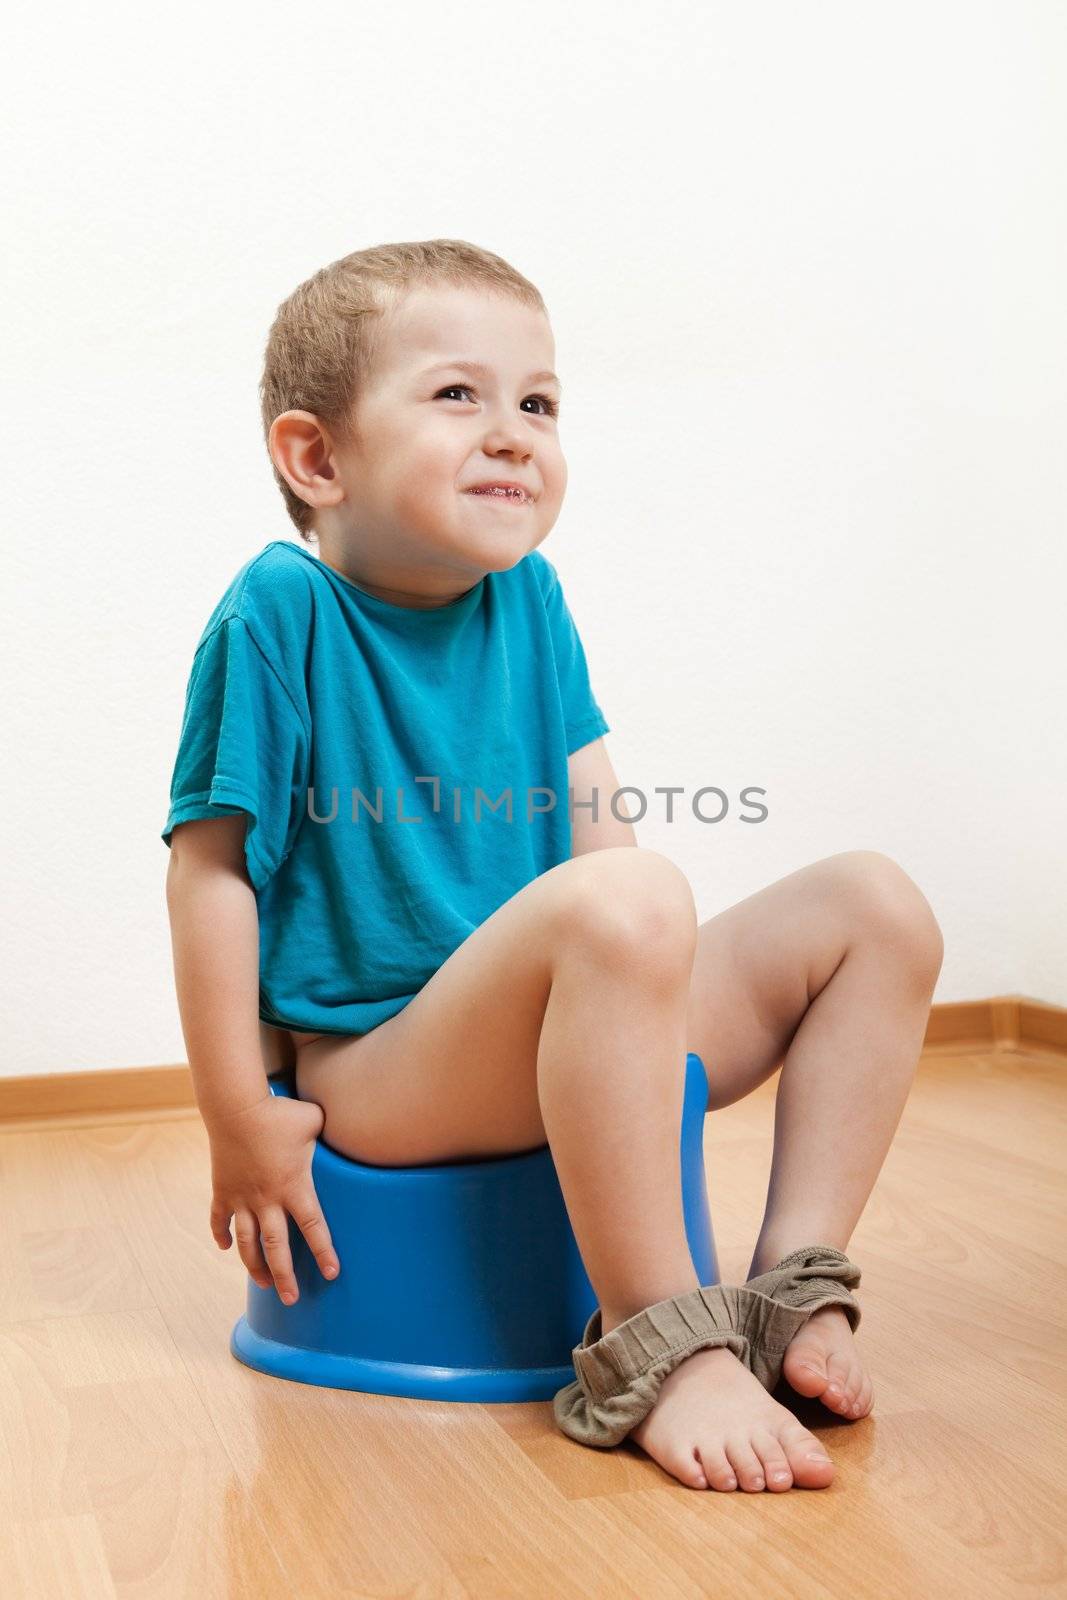 Little smiling child boy urinating toilet potty pan